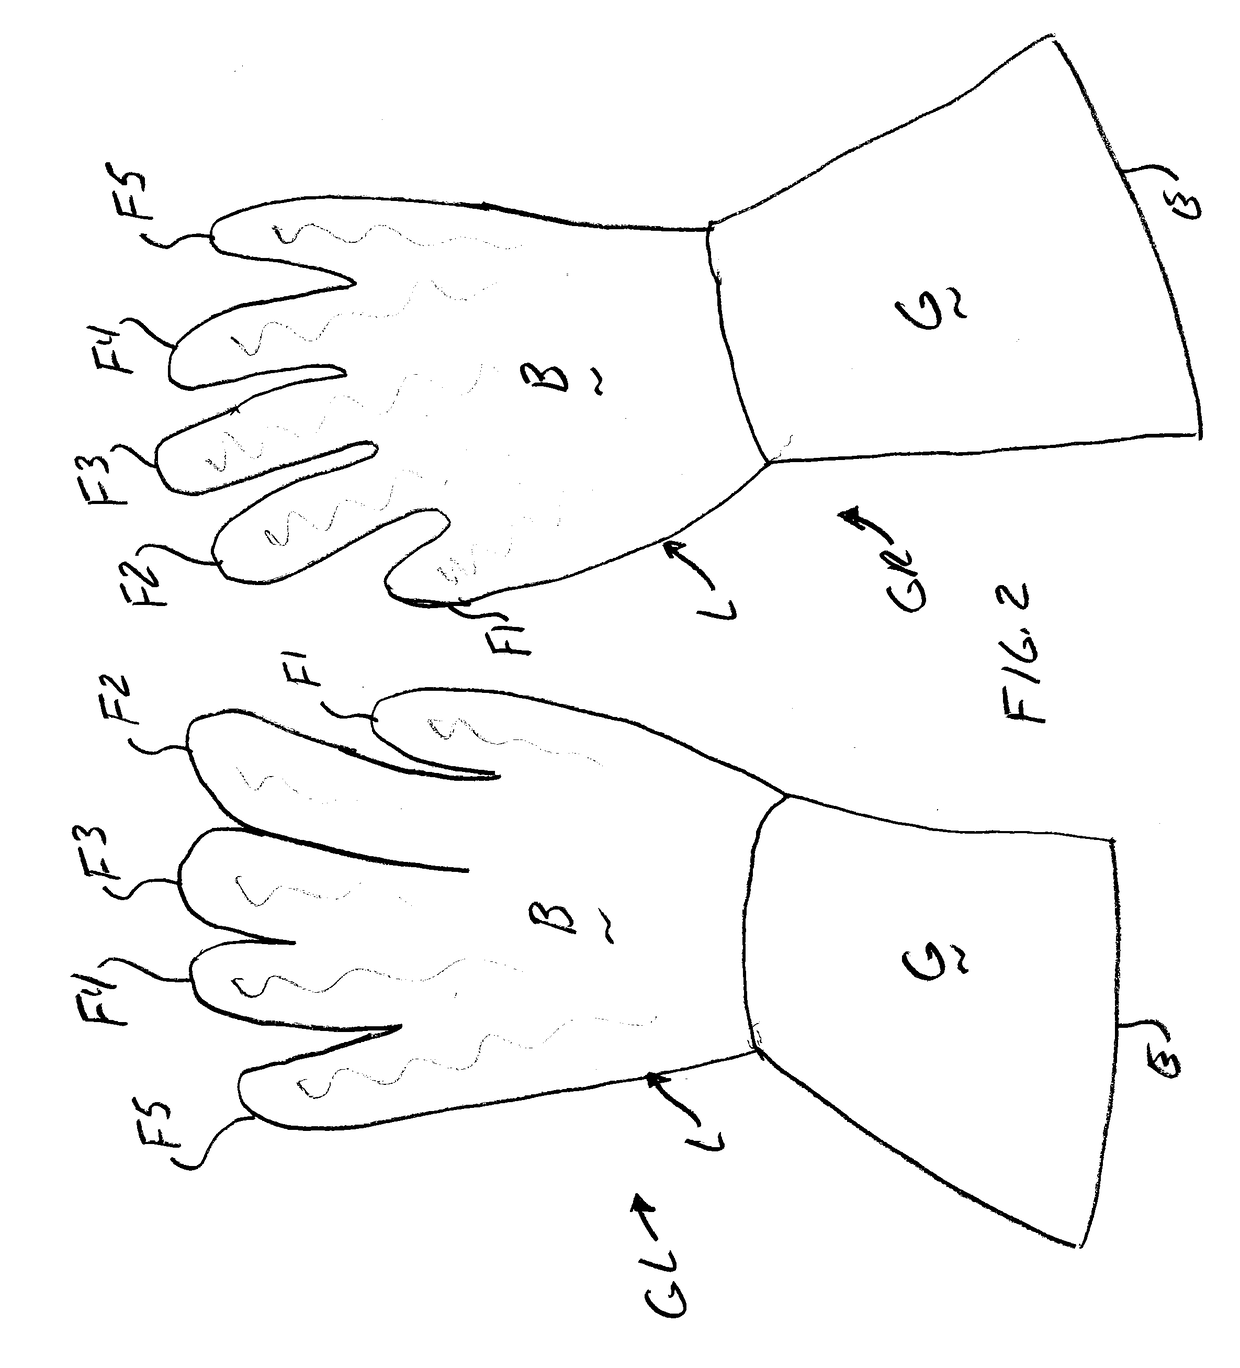 Scrub glove for cleaning various articles